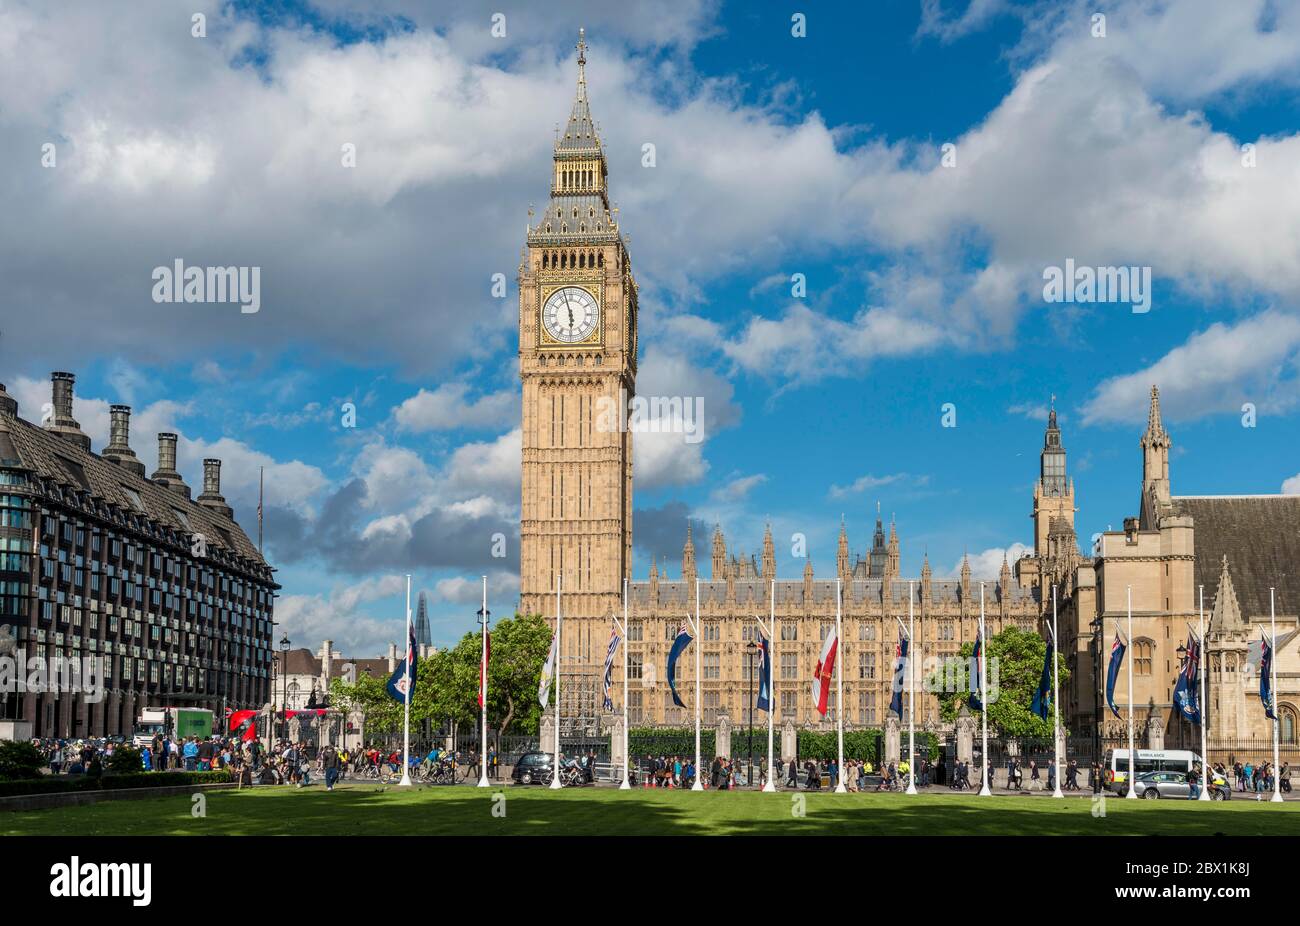 Palace of Westminster, Houses of Parliament, Big Ben, City of Westminster, London, England, Great Britain Stock Photo